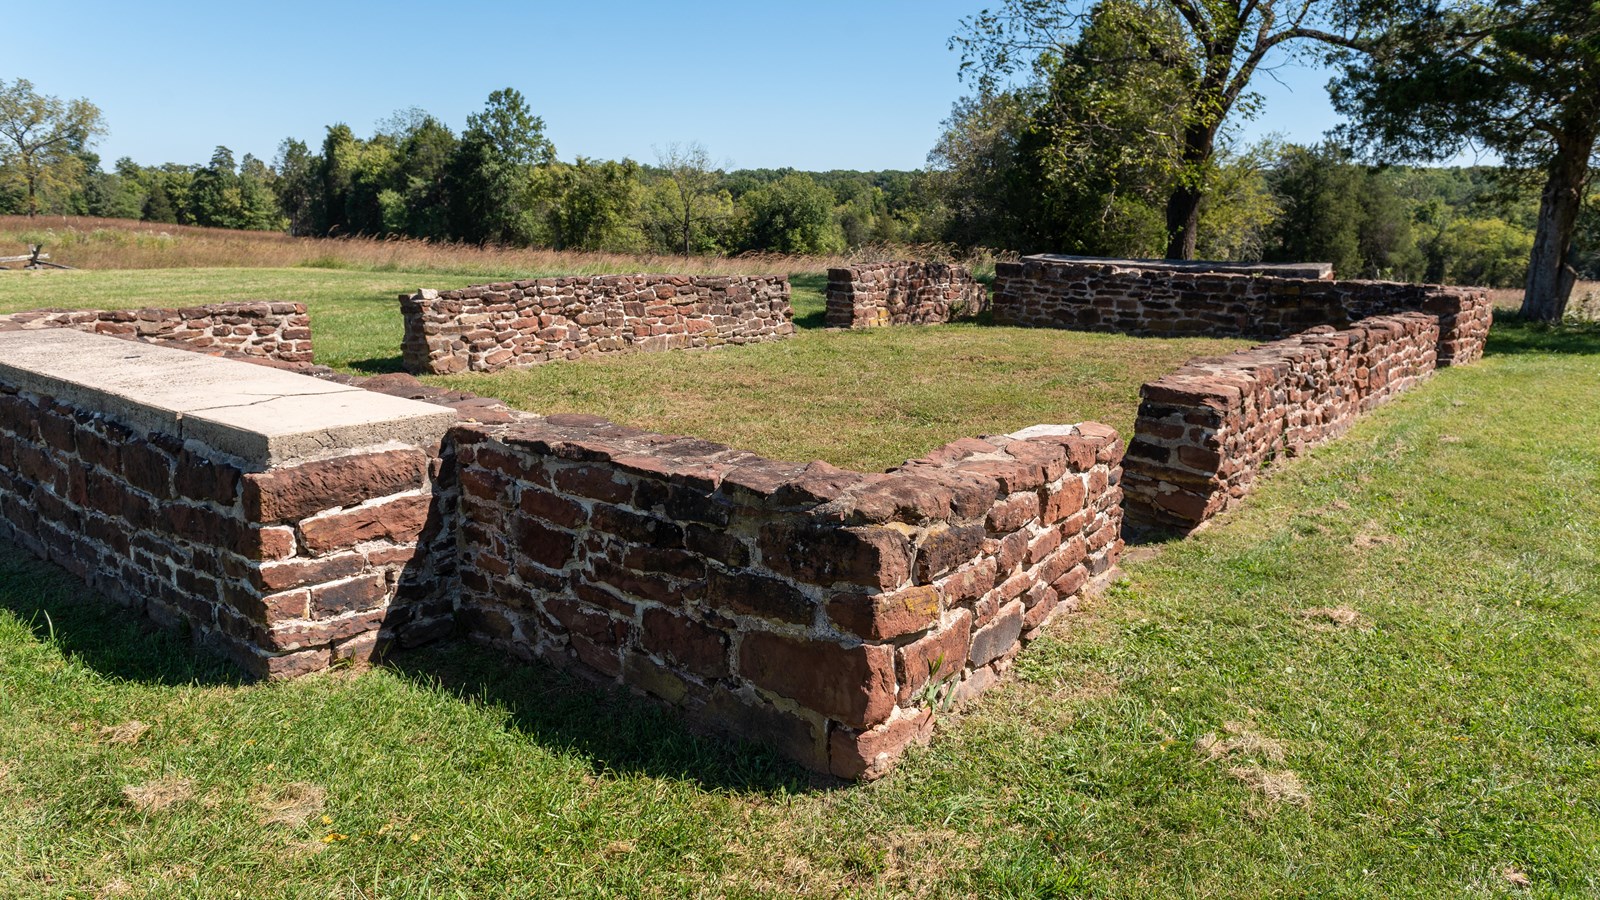 Ruins of a stone house foundation